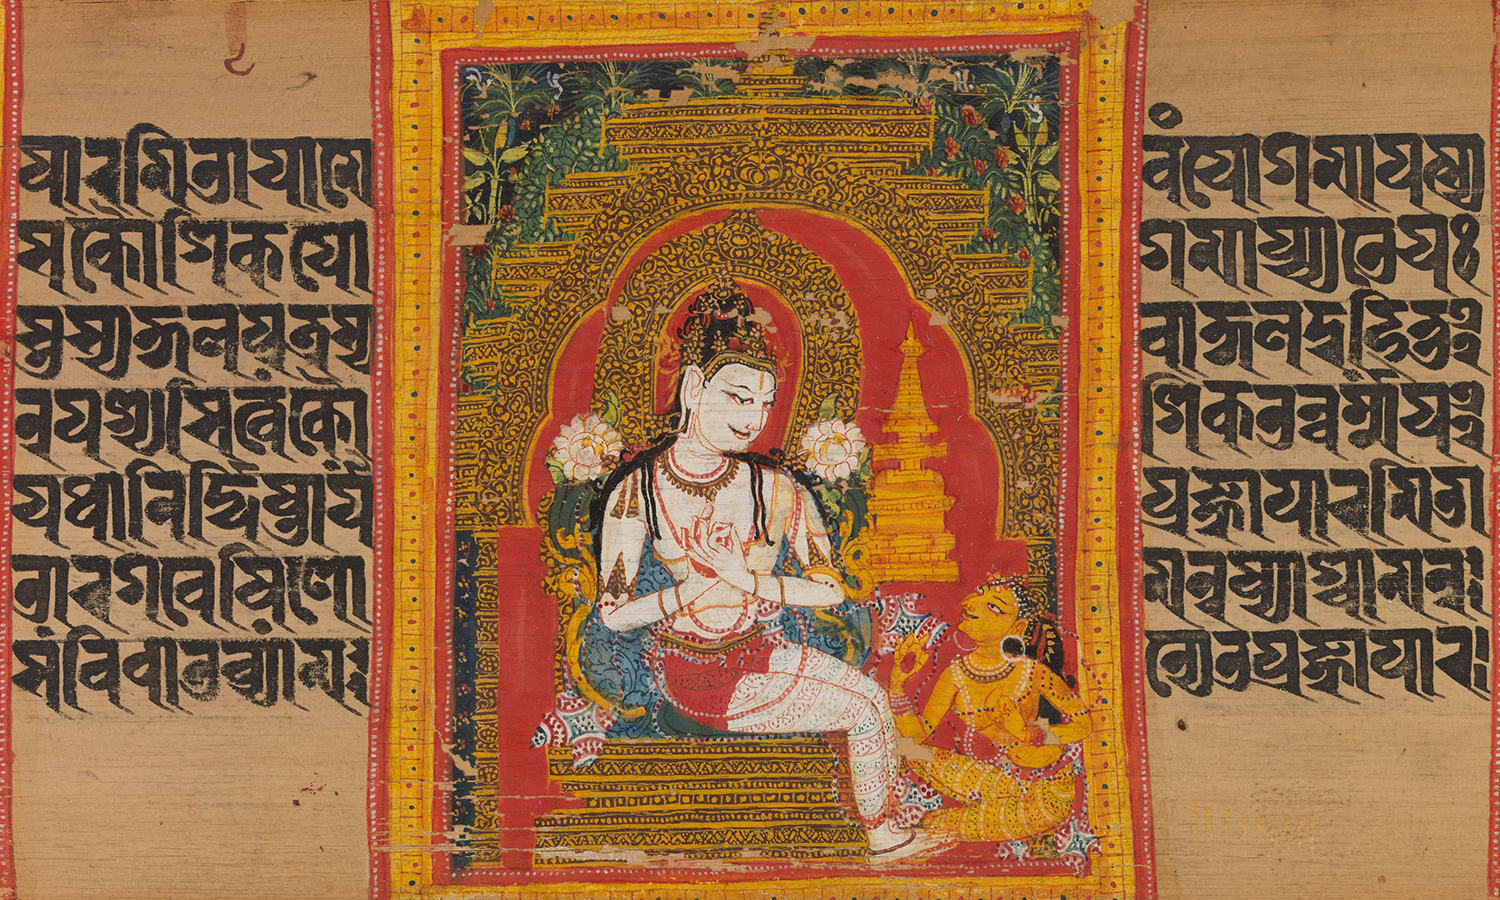 A manuscript depicting Avalokiteshvara Padmapani in the centre with text on either side.